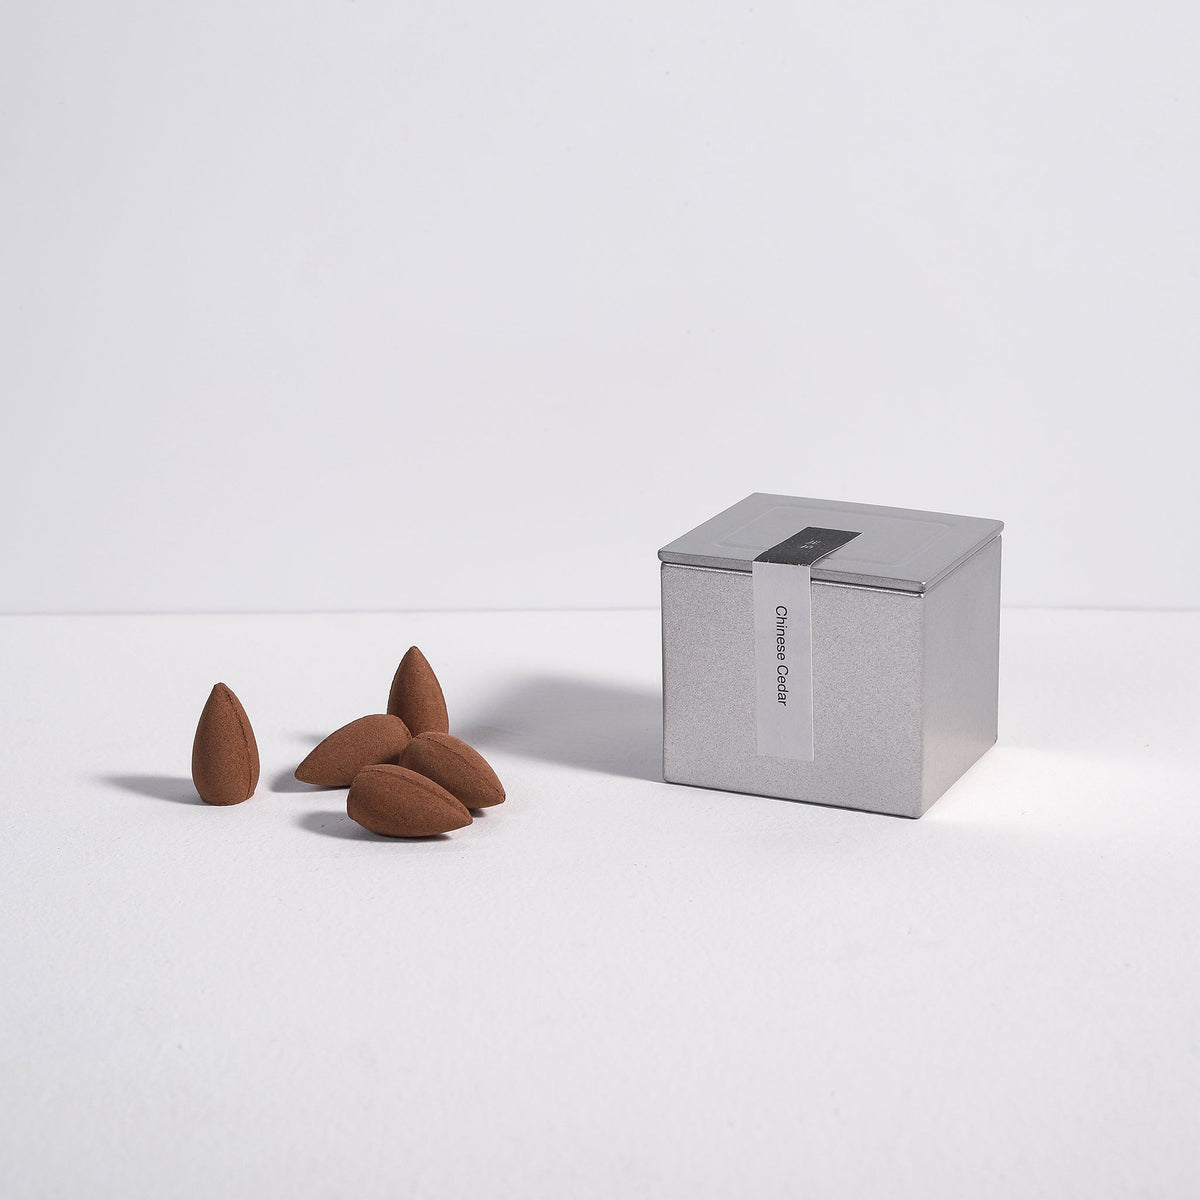 Backflow Incense Cones by Kin Objects Box on Table